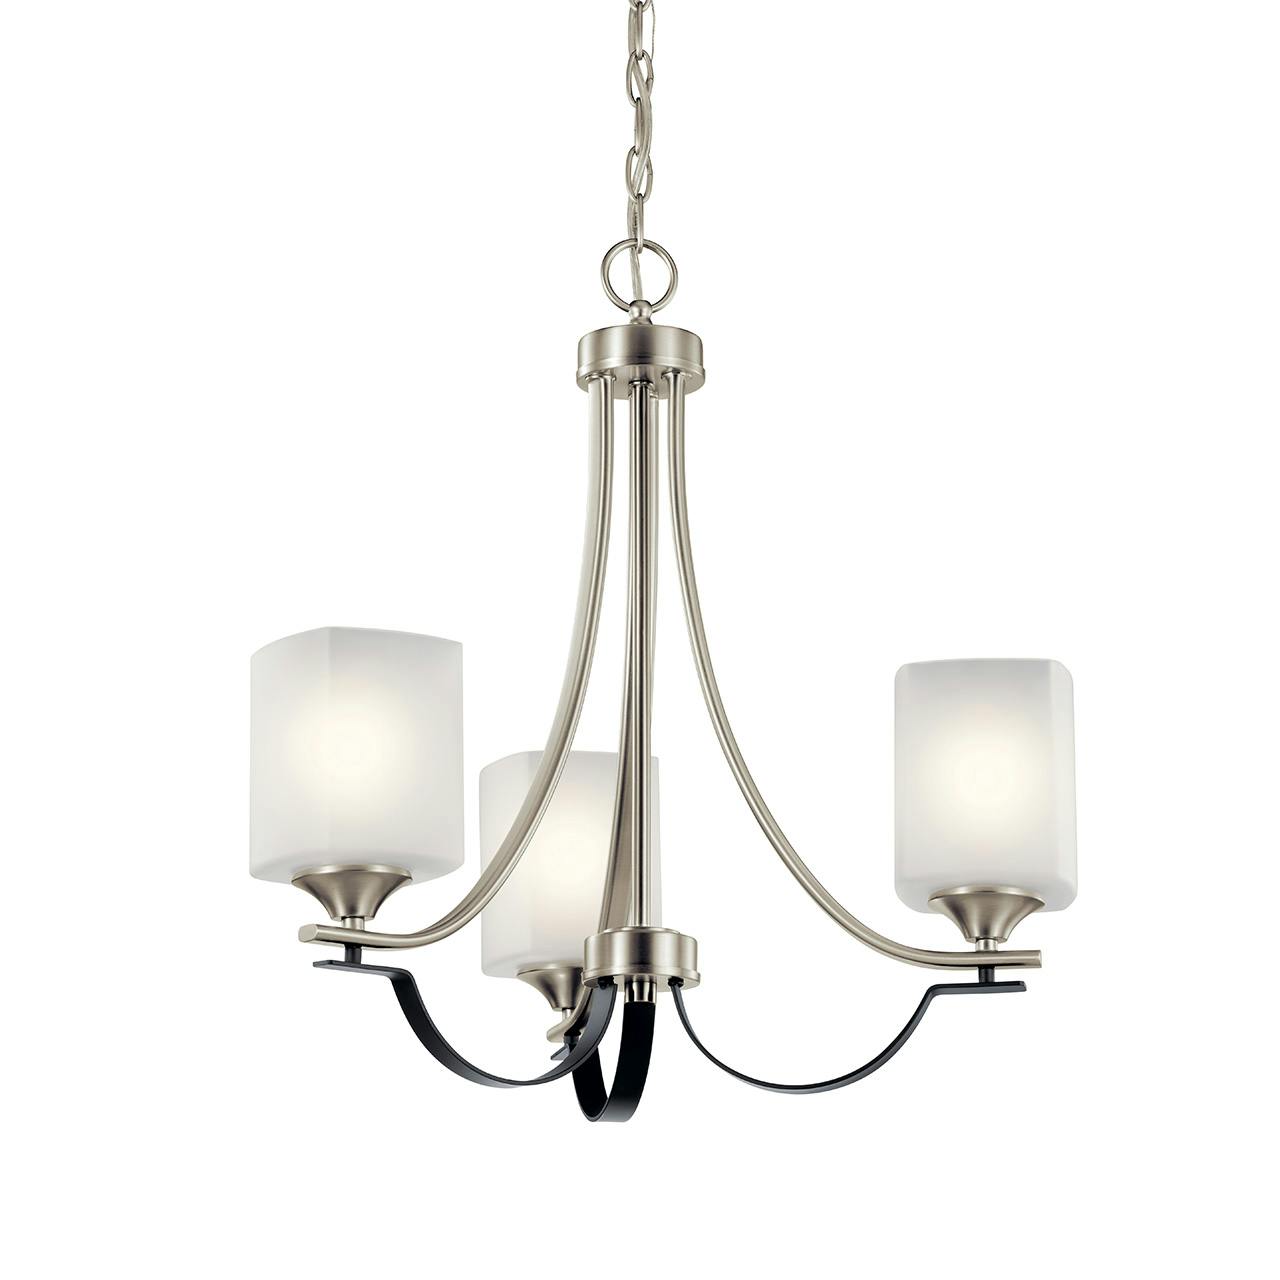 Tula 21" Convertible Chandelier Nickel without the canopy on a white background